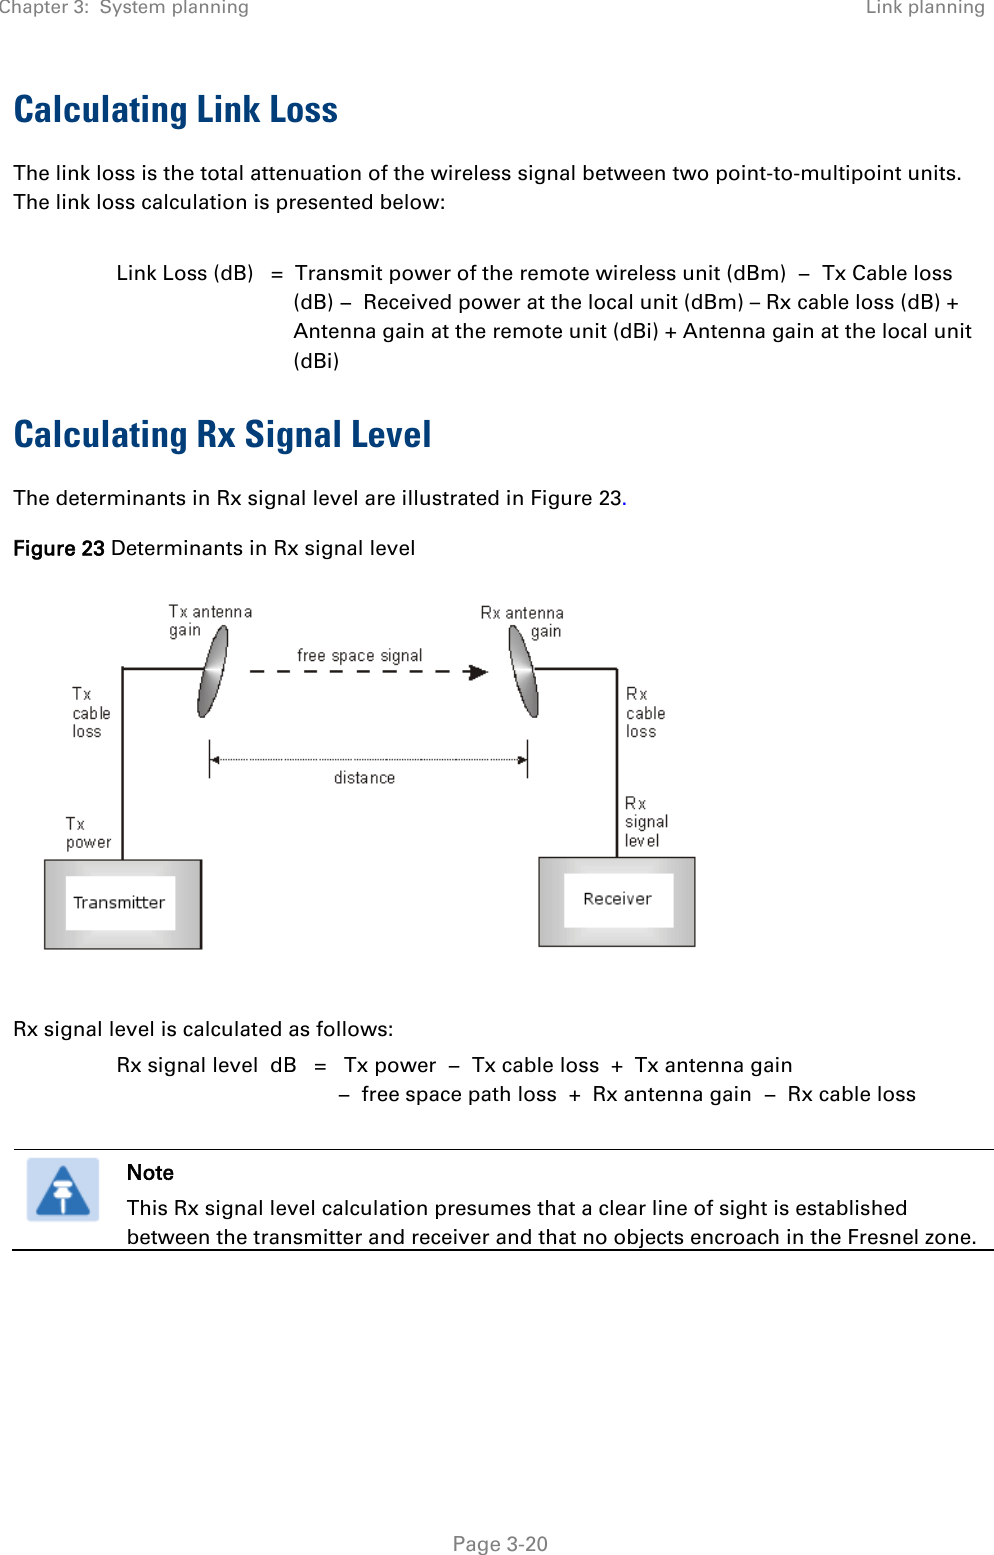 Chapter 3:  System planning Link planning   Page 3-20 Calculating Link Loss The link loss is the total attenuation of the wireless signal between two point-to-multipoint units. The link loss calculation is presented below:  Link Loss (dB)   =  Transmit power of the remote wireless unit (dBm)  −  Tx Cable loss (dB) −  Received power at the local unit (dBm) – Rx cable loss (dB) + Antenna gain at the remote unit (dBi) + Antenna gain at the local unit (dBi) Calculating Rx Signal Level The determinants in Rx signal level are illustrated in Figure 23. Figure 23 Determinants in Rx signal level   Rx signal level is calculated as follows: Rx signal level  dB   =   Tx power  −  Tx cable loss  +  Tx antenna gain   −  free space path loss  +  Rx antenna gain  −  Rx cable loss   Note This Rx signal level calculation presumes that a clear line of sight is established between the transmitter and receiver and that no objects encroach in the Fresnel zone.  